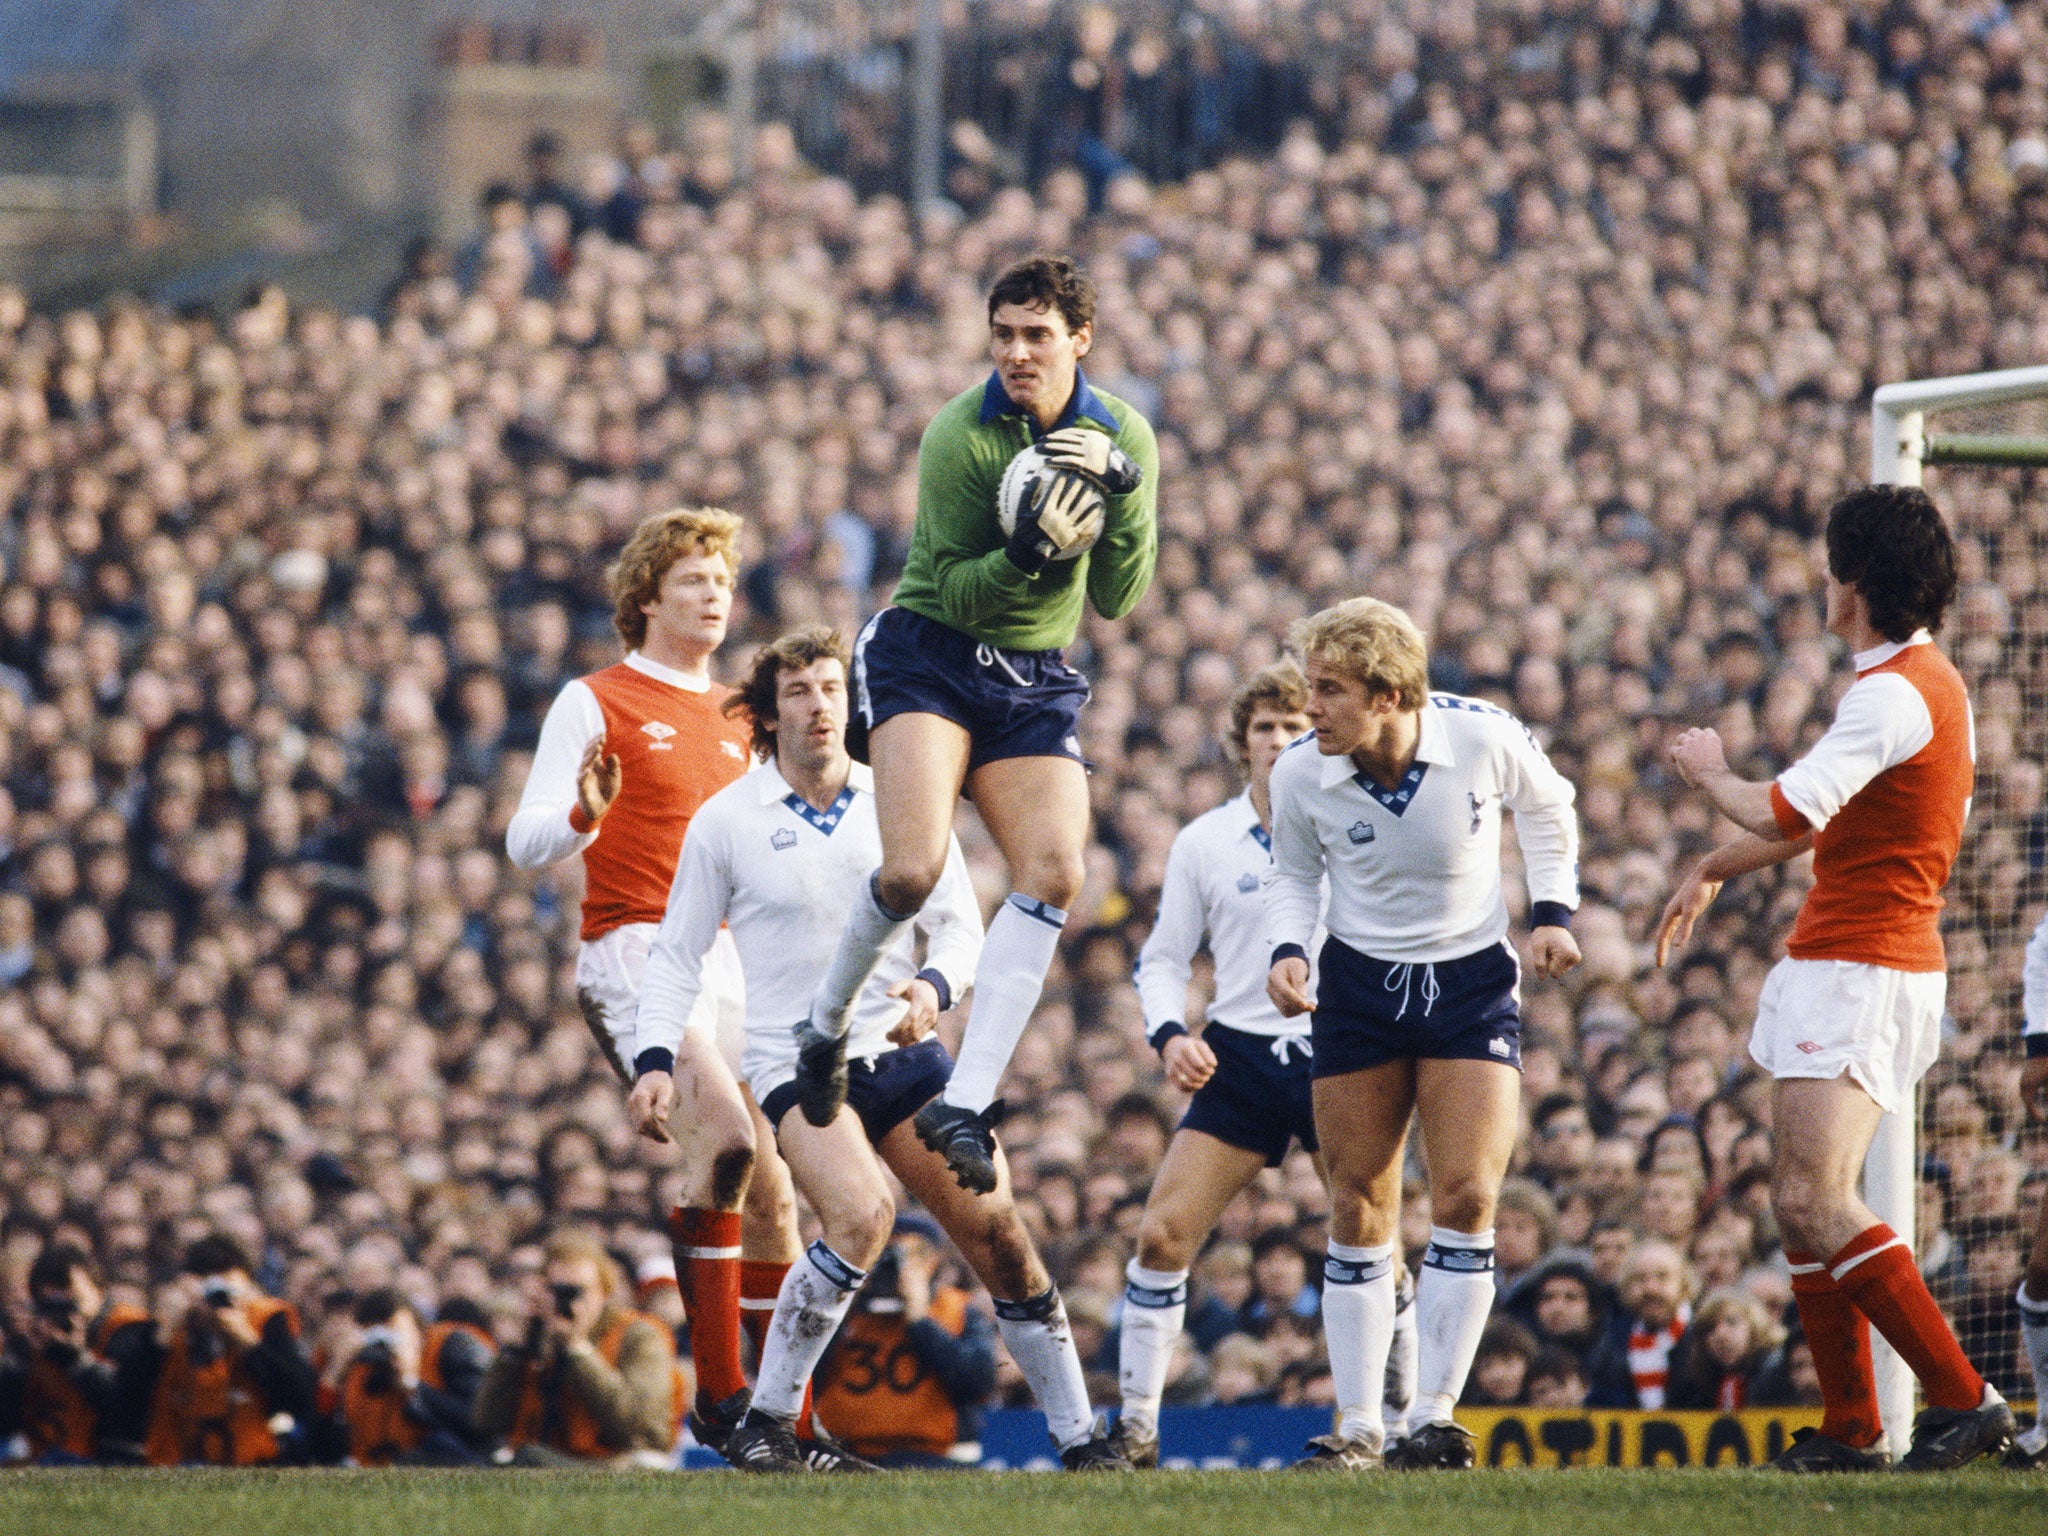 Spurs goalkeeper Milija Aleksic claims a cross watched by Arsenal players Willie Young (l) and Frank Stapleton (r) alongside Spurs players Gerry Armstrong (2nd left) and Don McAllister (2nd right) during a First Division match between Arsenal and Tottenham Hotspur at Highbury on December 26, 1979